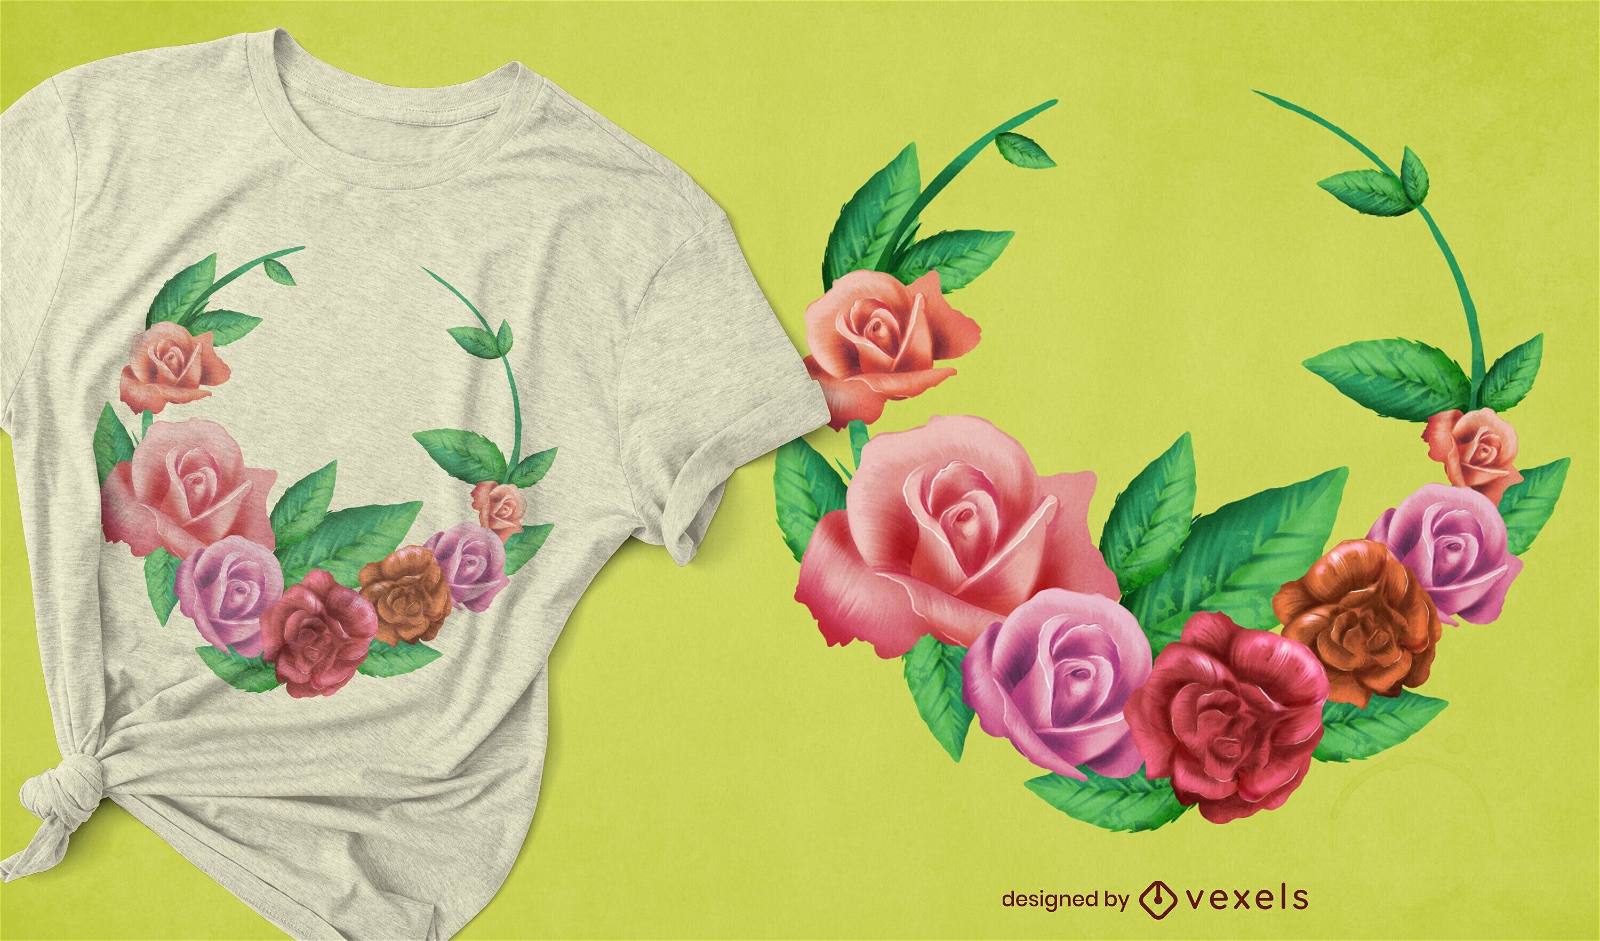 Rose flower and leaves crown t-shirt design